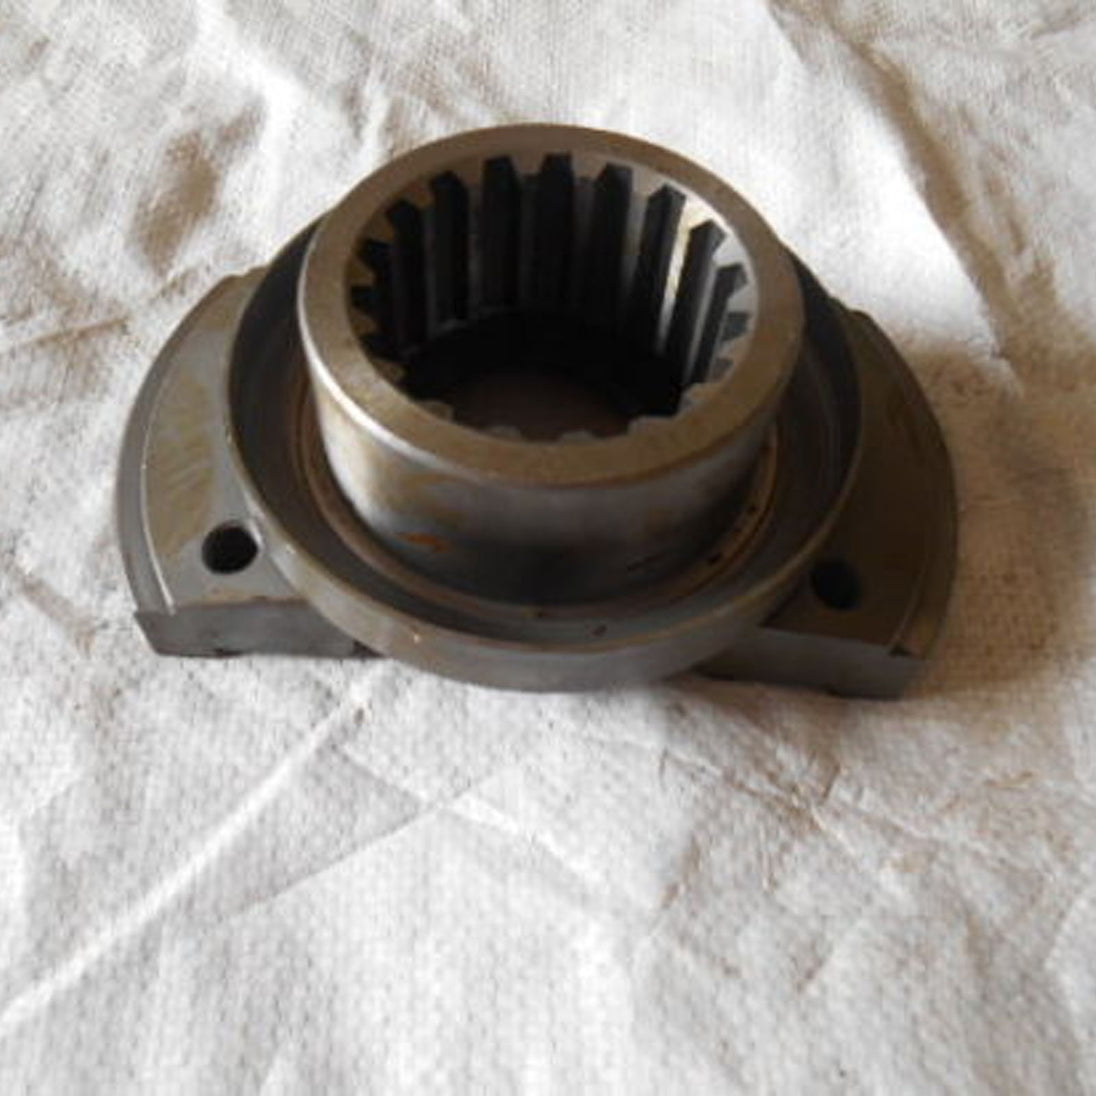 Joint flange coupling 135-13-31362 for D53A-17 bulldozer